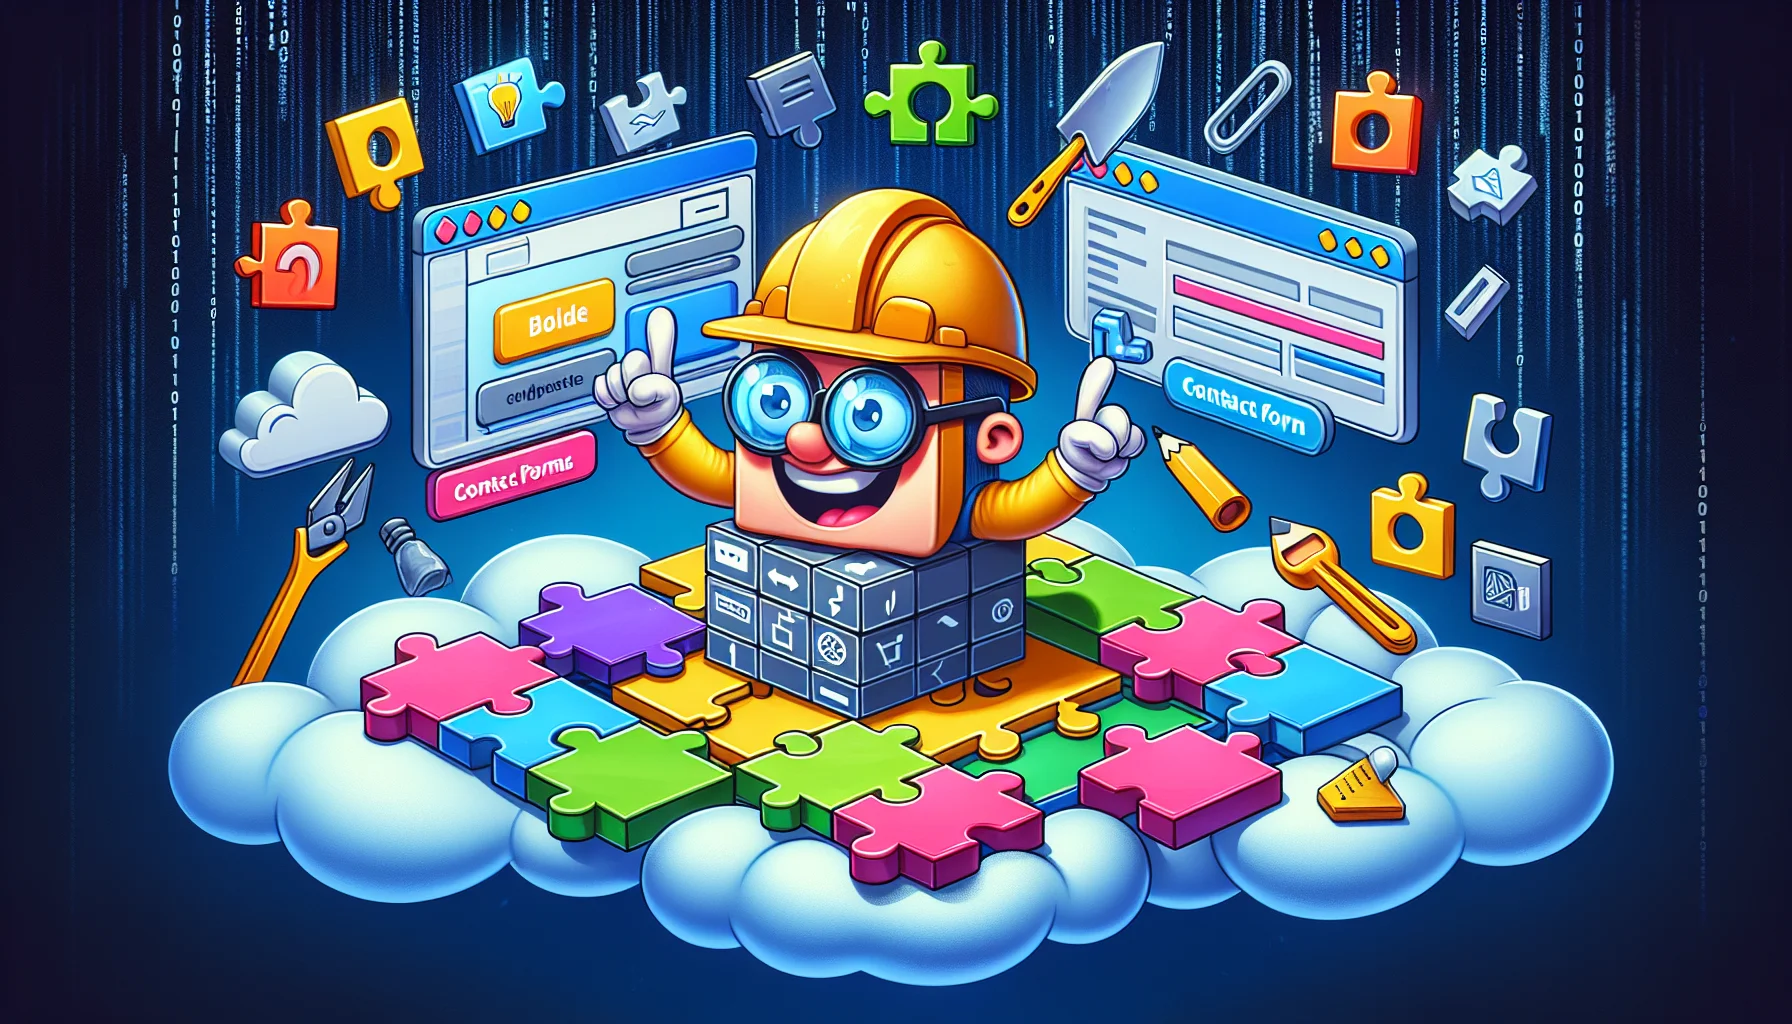 A humorous scene depicting a low-code website builder platform. Imagine the platform interface as a cartoon character with a construction hat, glasses, and a broad smile, designing a website with ease and speed. The character is surrounded by website components like text blocks, image galleries, navigation menus, contact forms, all represented as colourful puzzle pieces which it fits together effortlessly. All this is happening on a floating cloud, hinting at the concept of web hosting. In the background, a digital sky with binary code raining down, symbolizing the online environment.